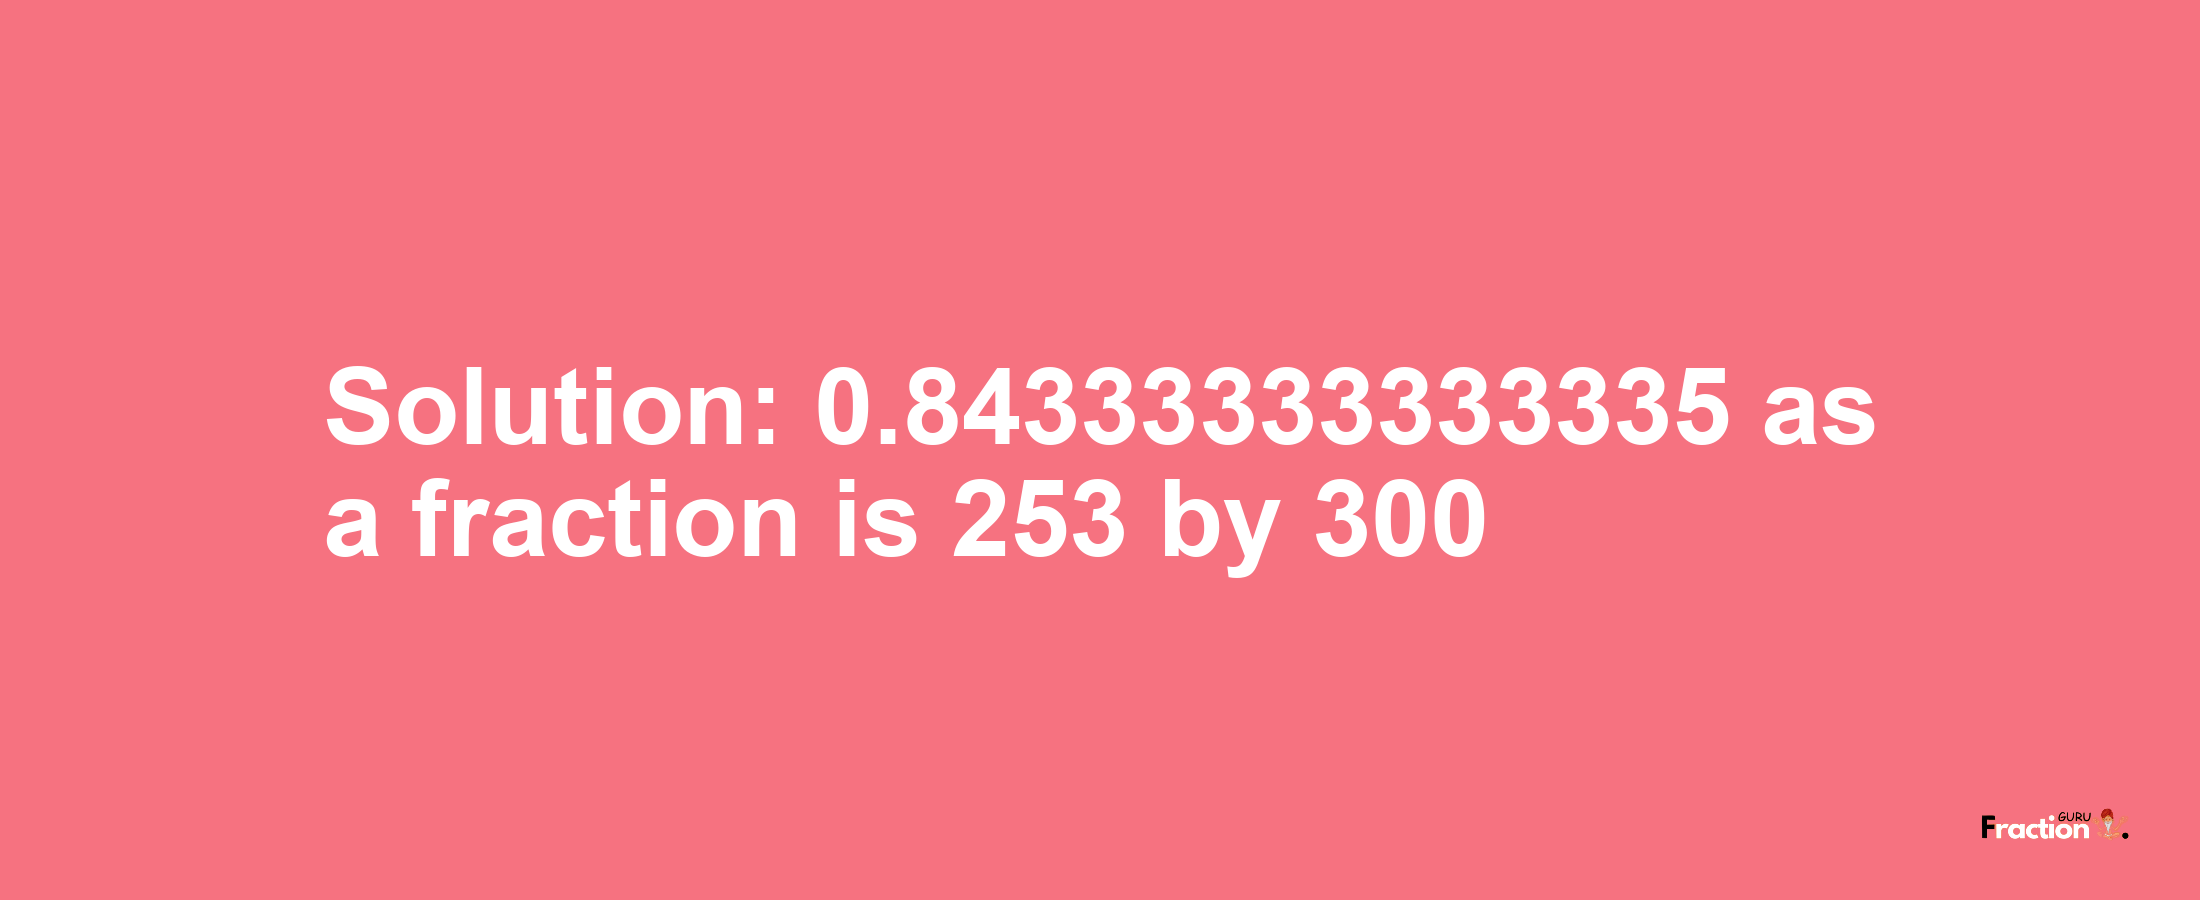 Solution:0.84333333333335 as a fraction is 253/300